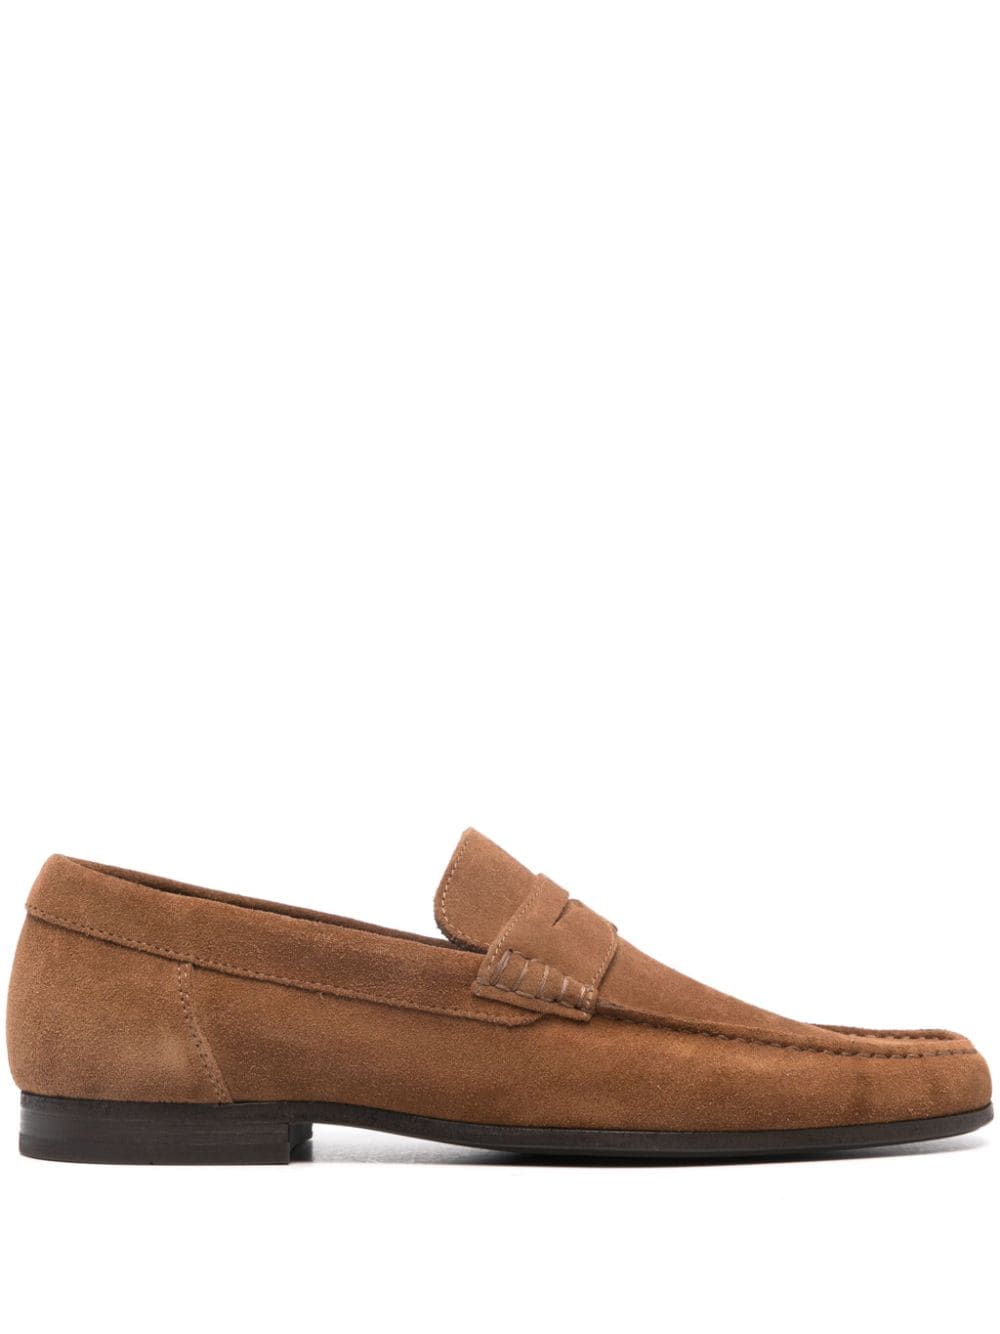 Moorer Casetti suede loafers - Braun